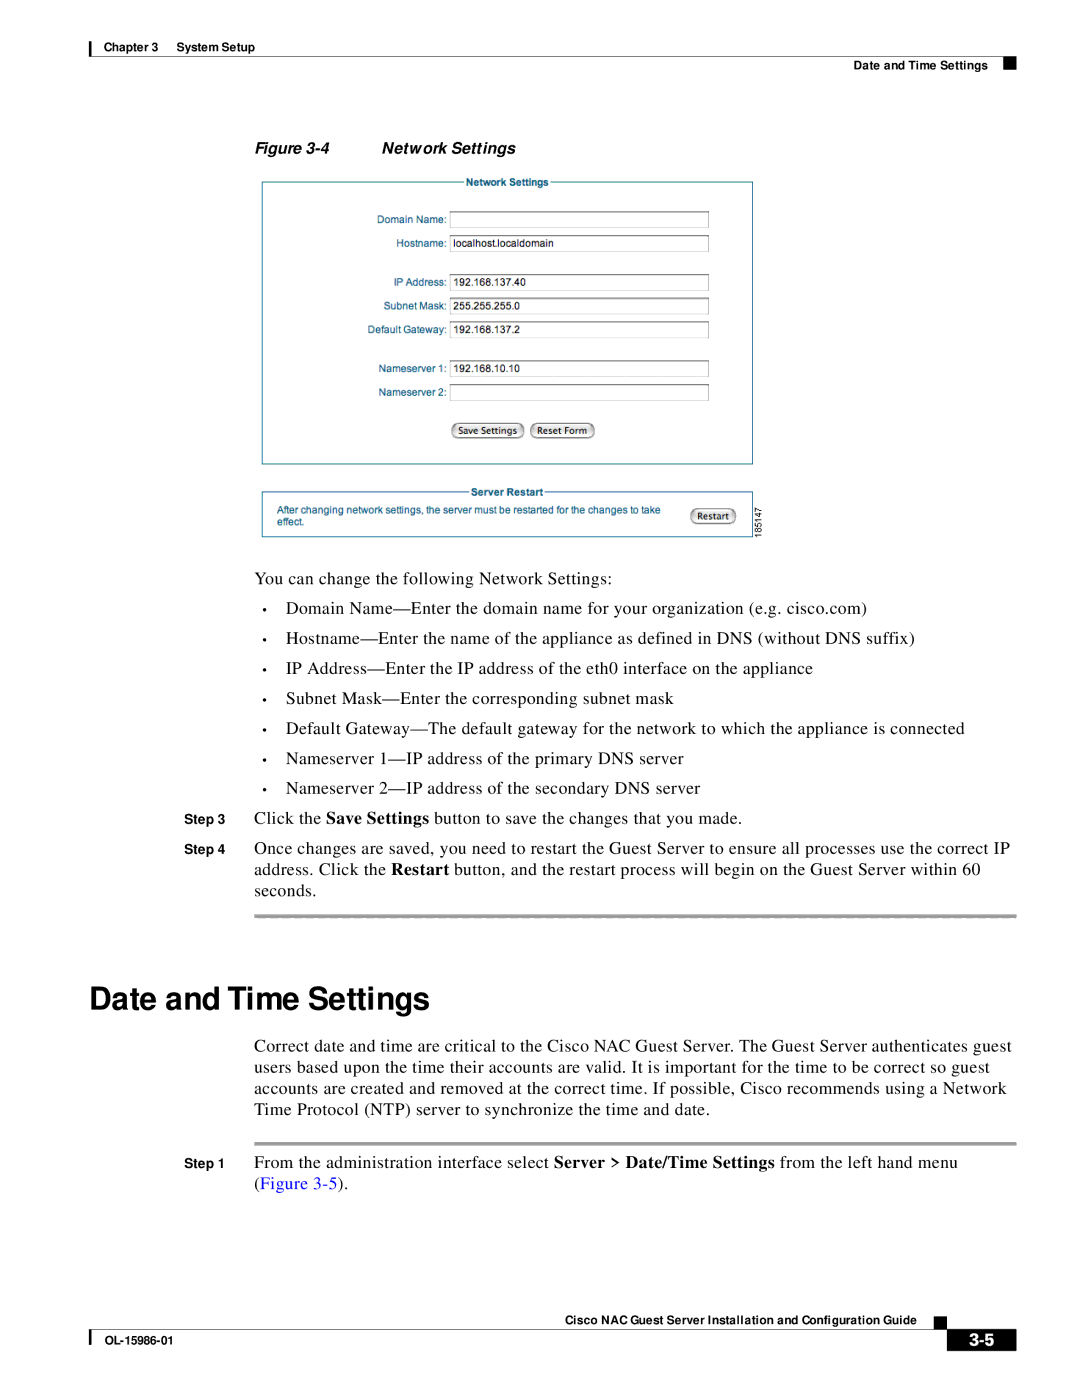 Cisco Systems OL-15986-01 manual Date and Time Settings, Network Settings 